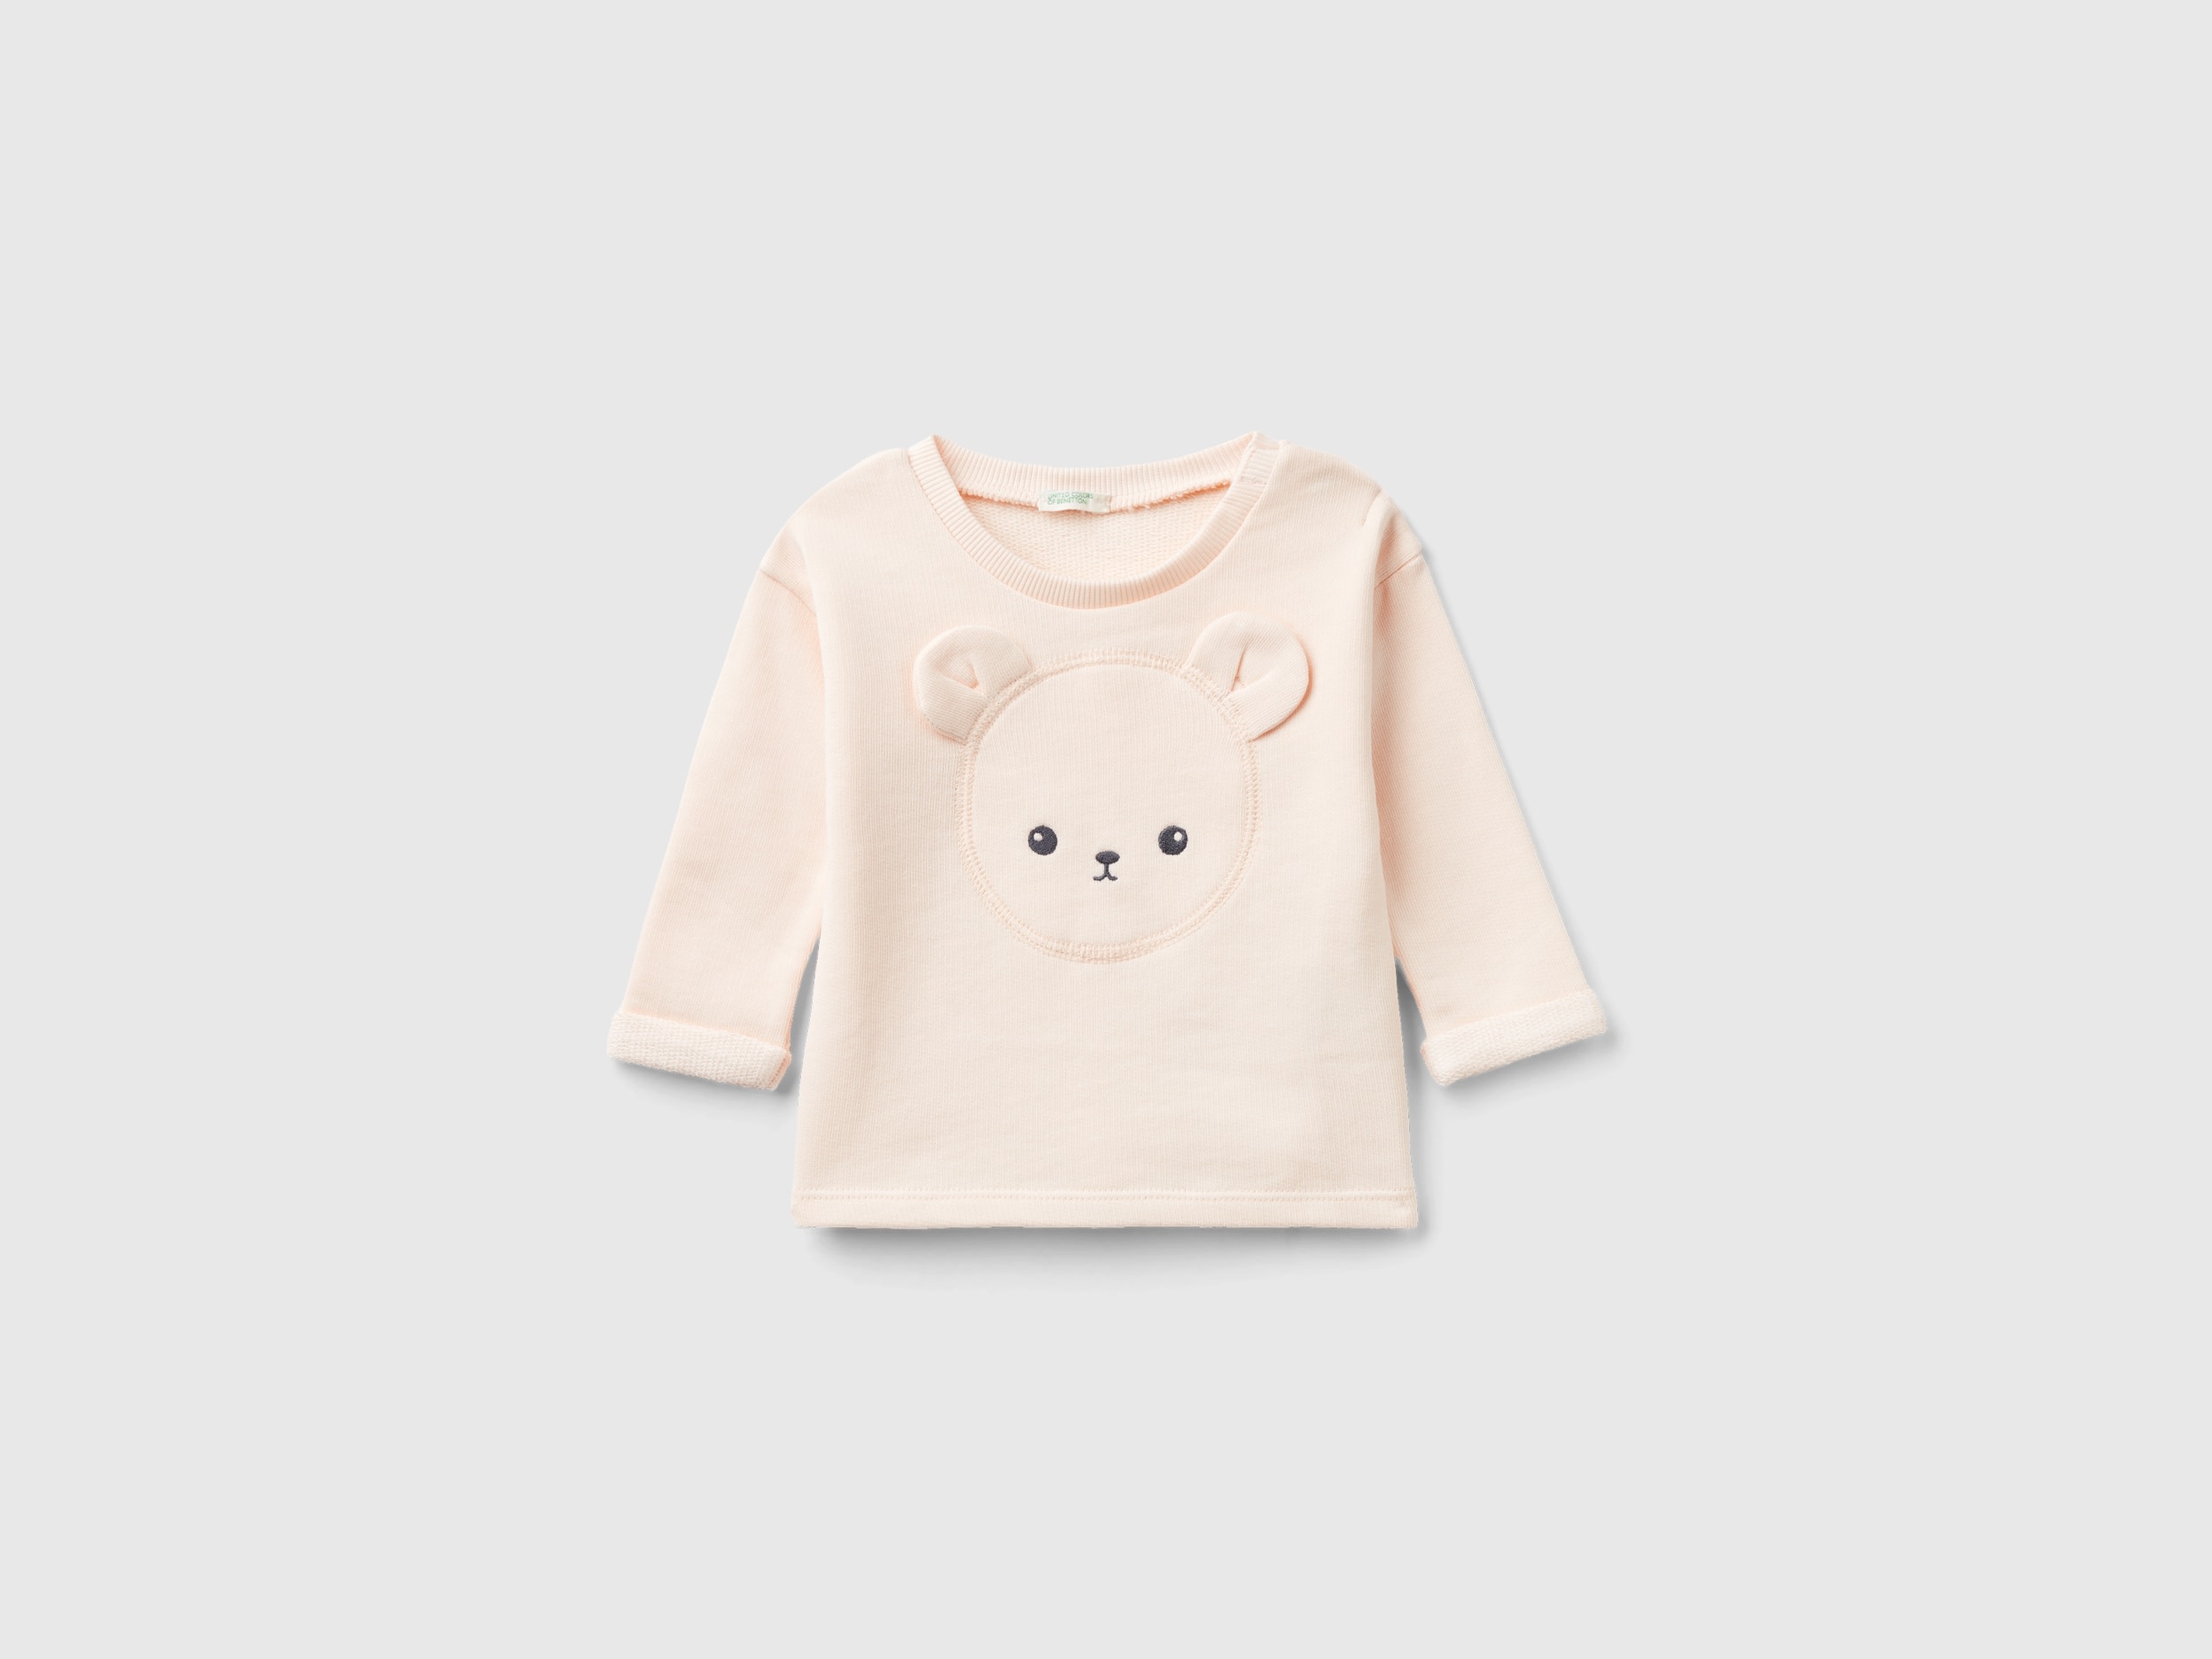 Image of Benetton, Organic Cotton Sweatshirt With Embroidery, size 50, Peach, Kids